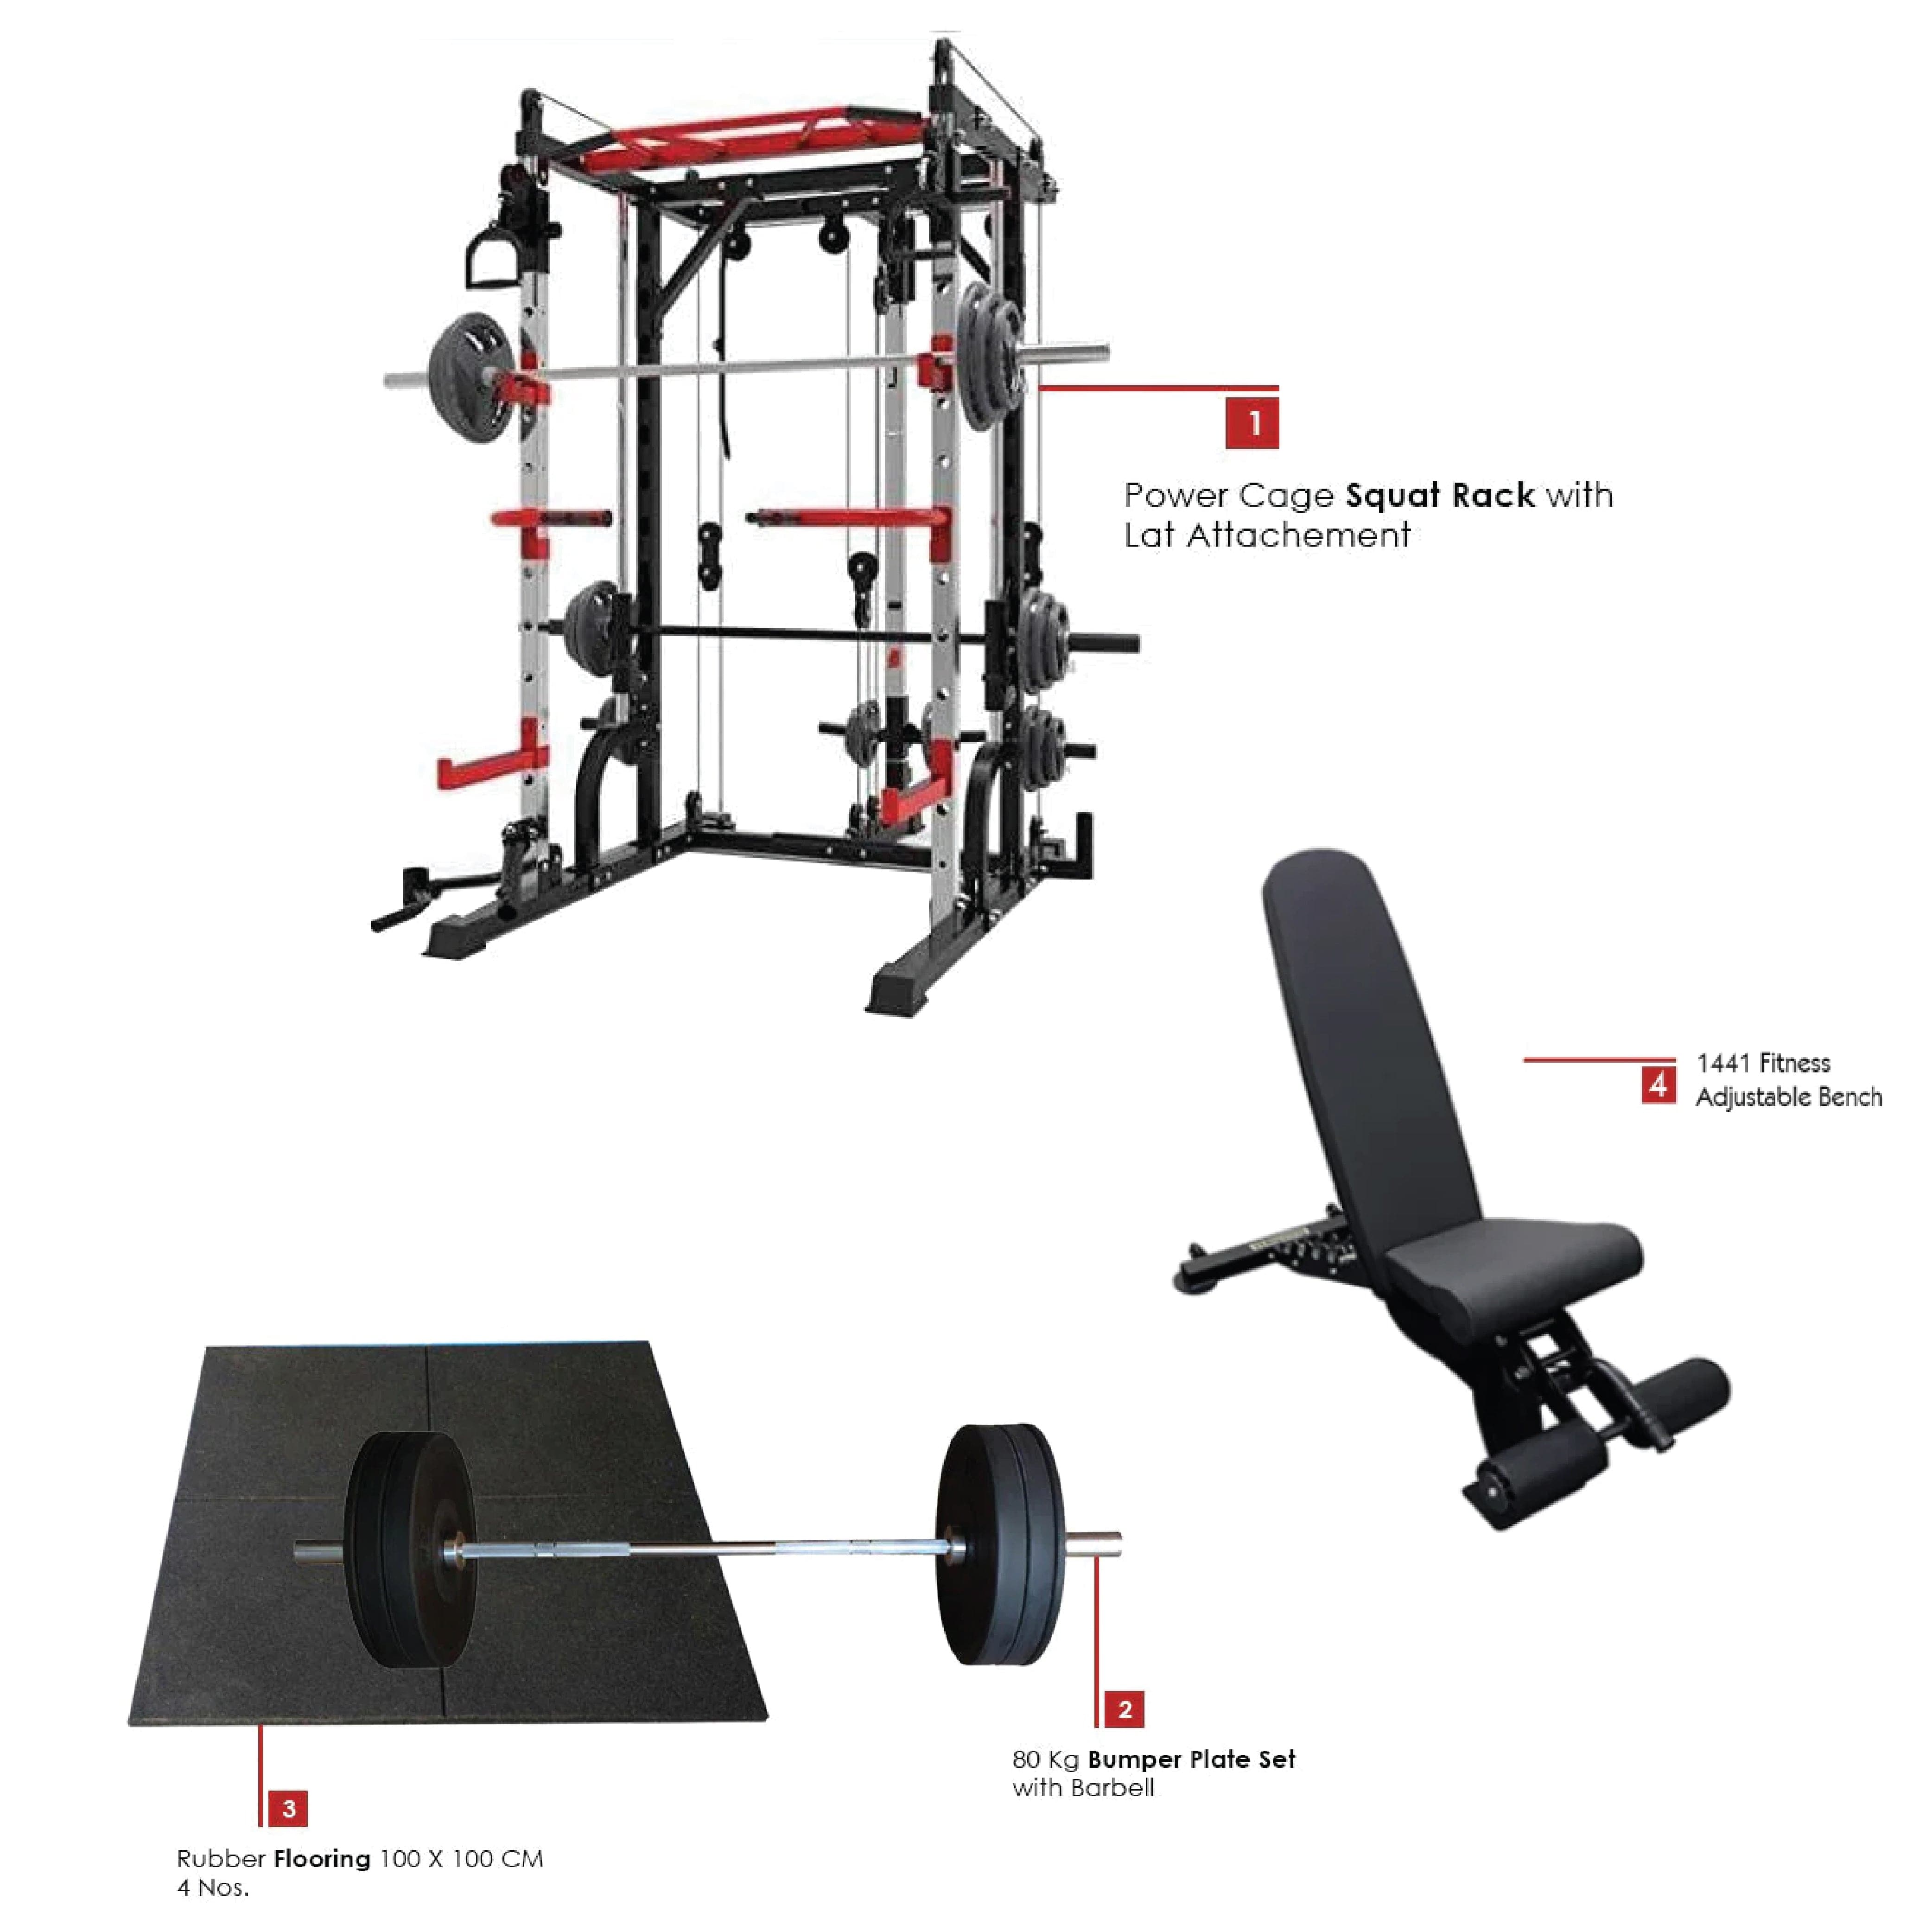 Combo Deal | 1441 Fitness Smith Machine With Functional Trainer And Squat Rack J009 + 80kg Apus Bumper Plates + Adjustable Bench A8007 + 15 MM Flooring - Athletix.ae